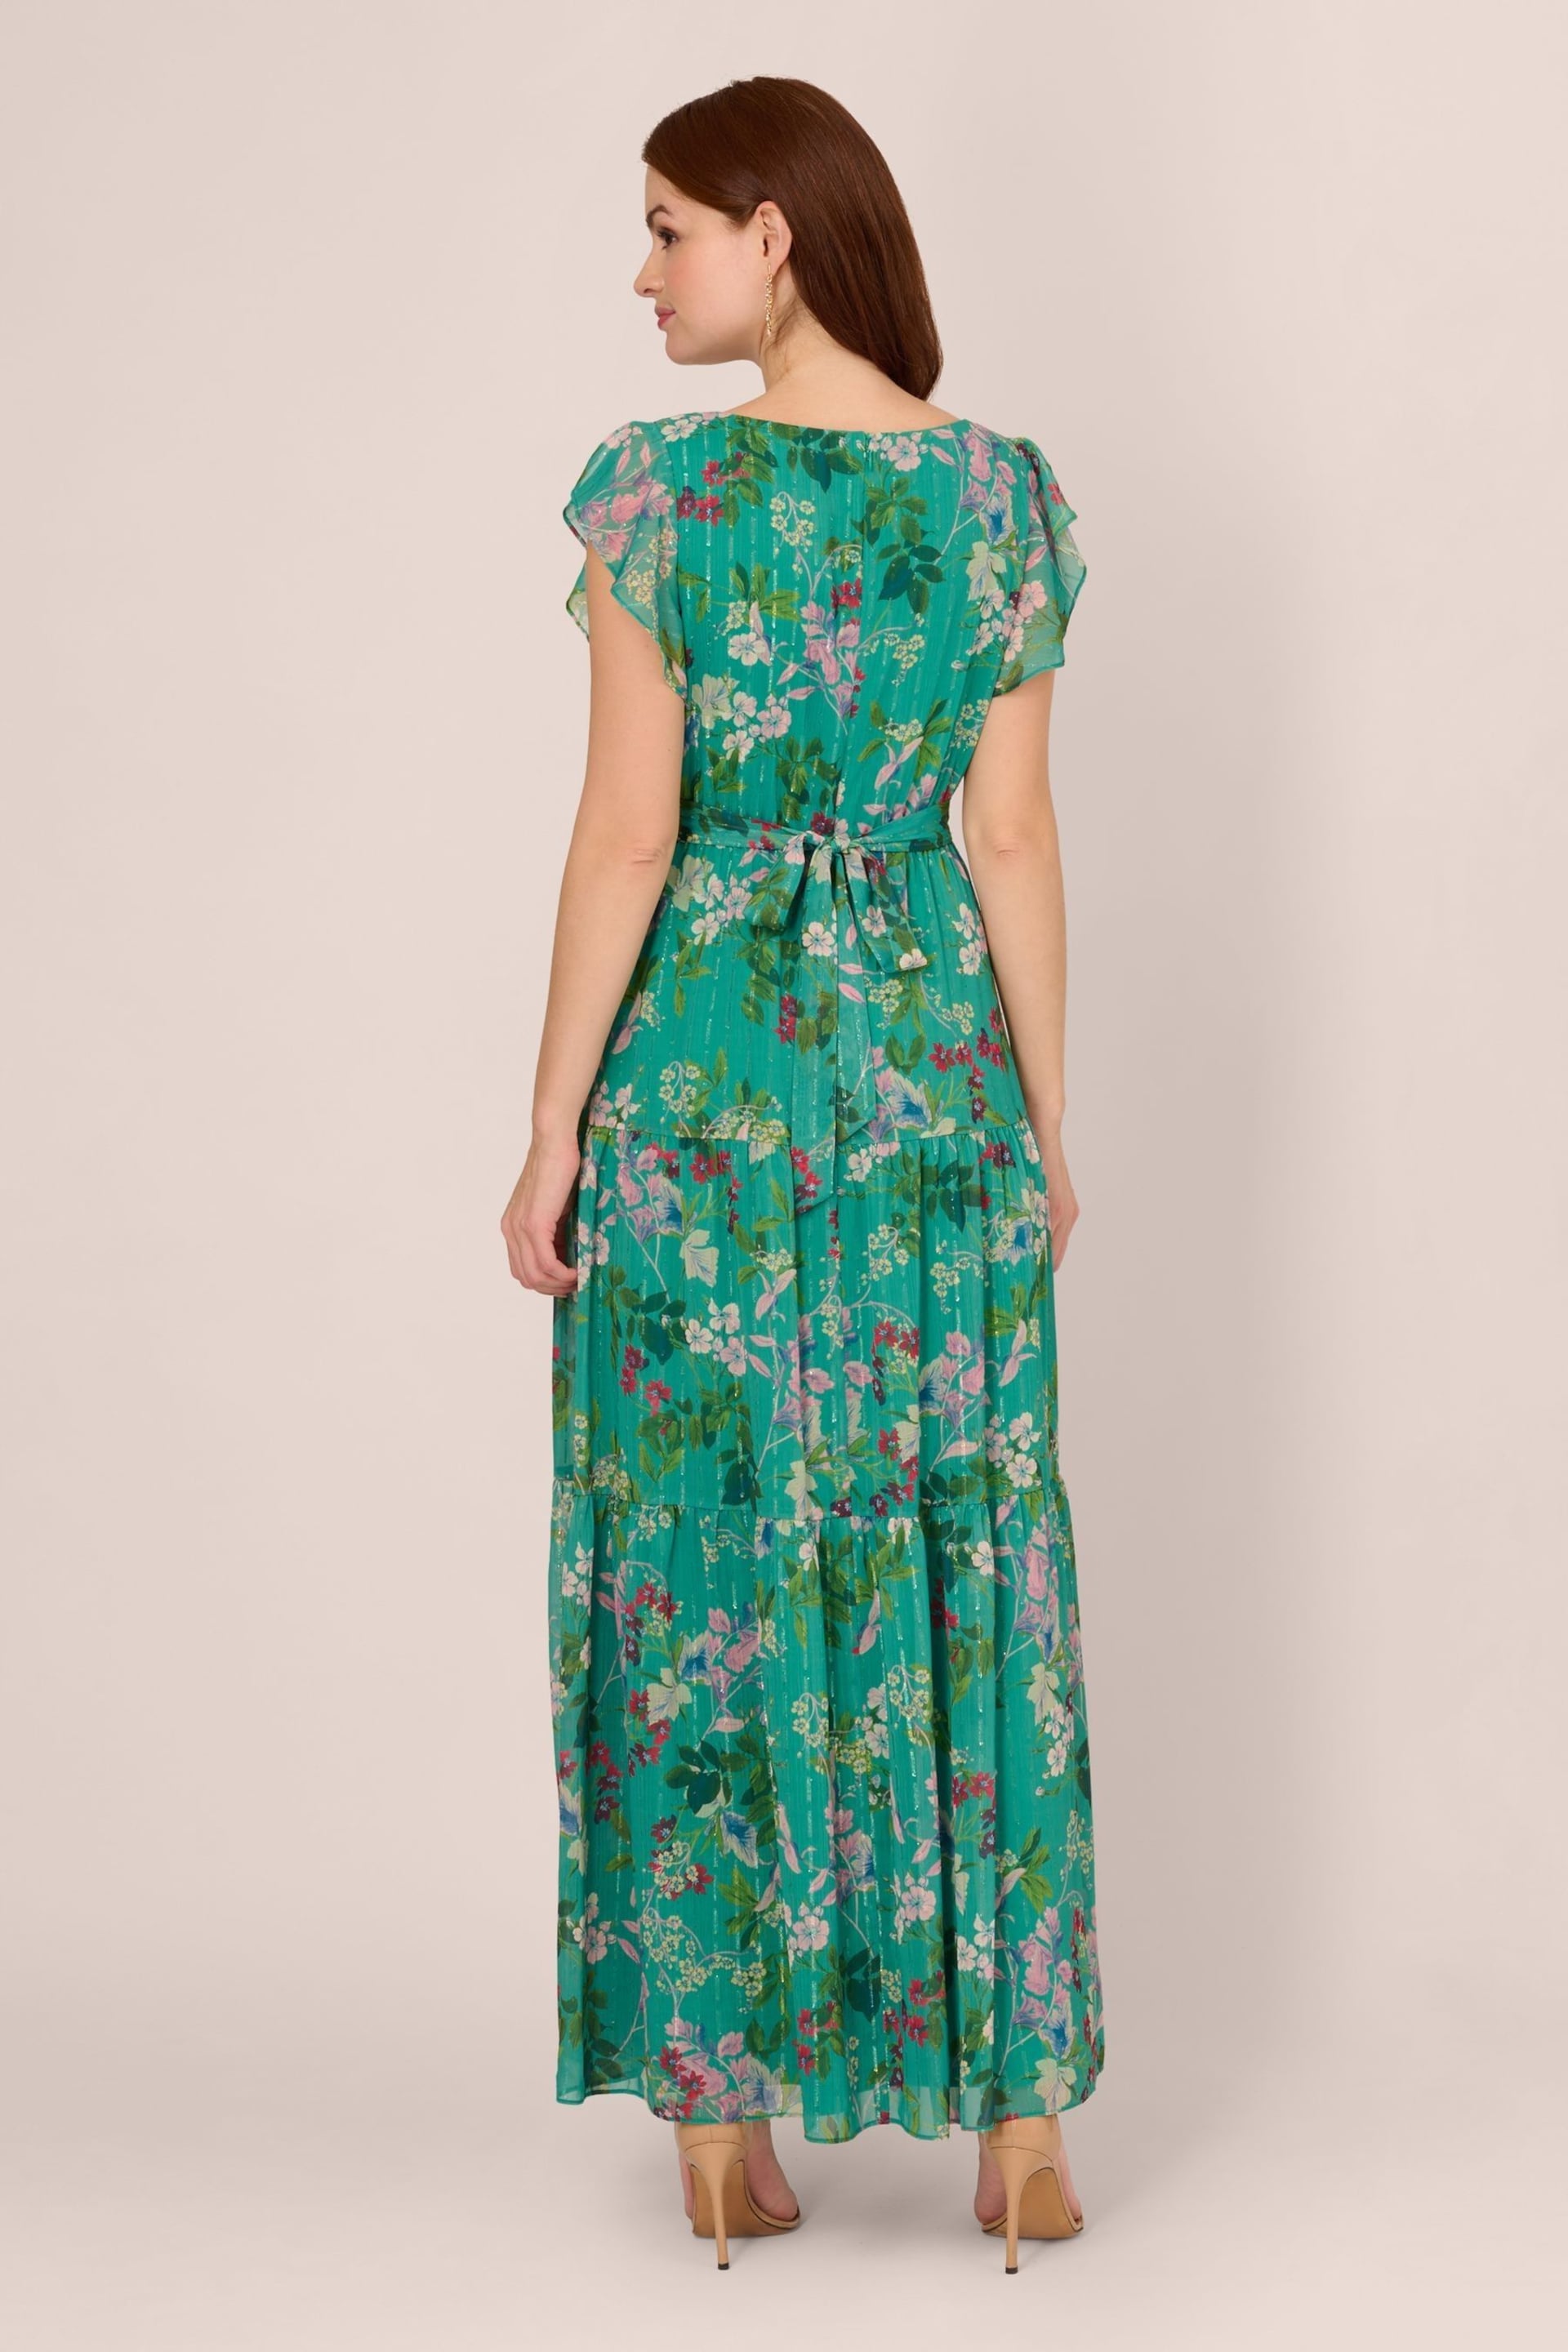 Adrianna Papell Green Print Tier Maxi Dress - Image 2 of 7